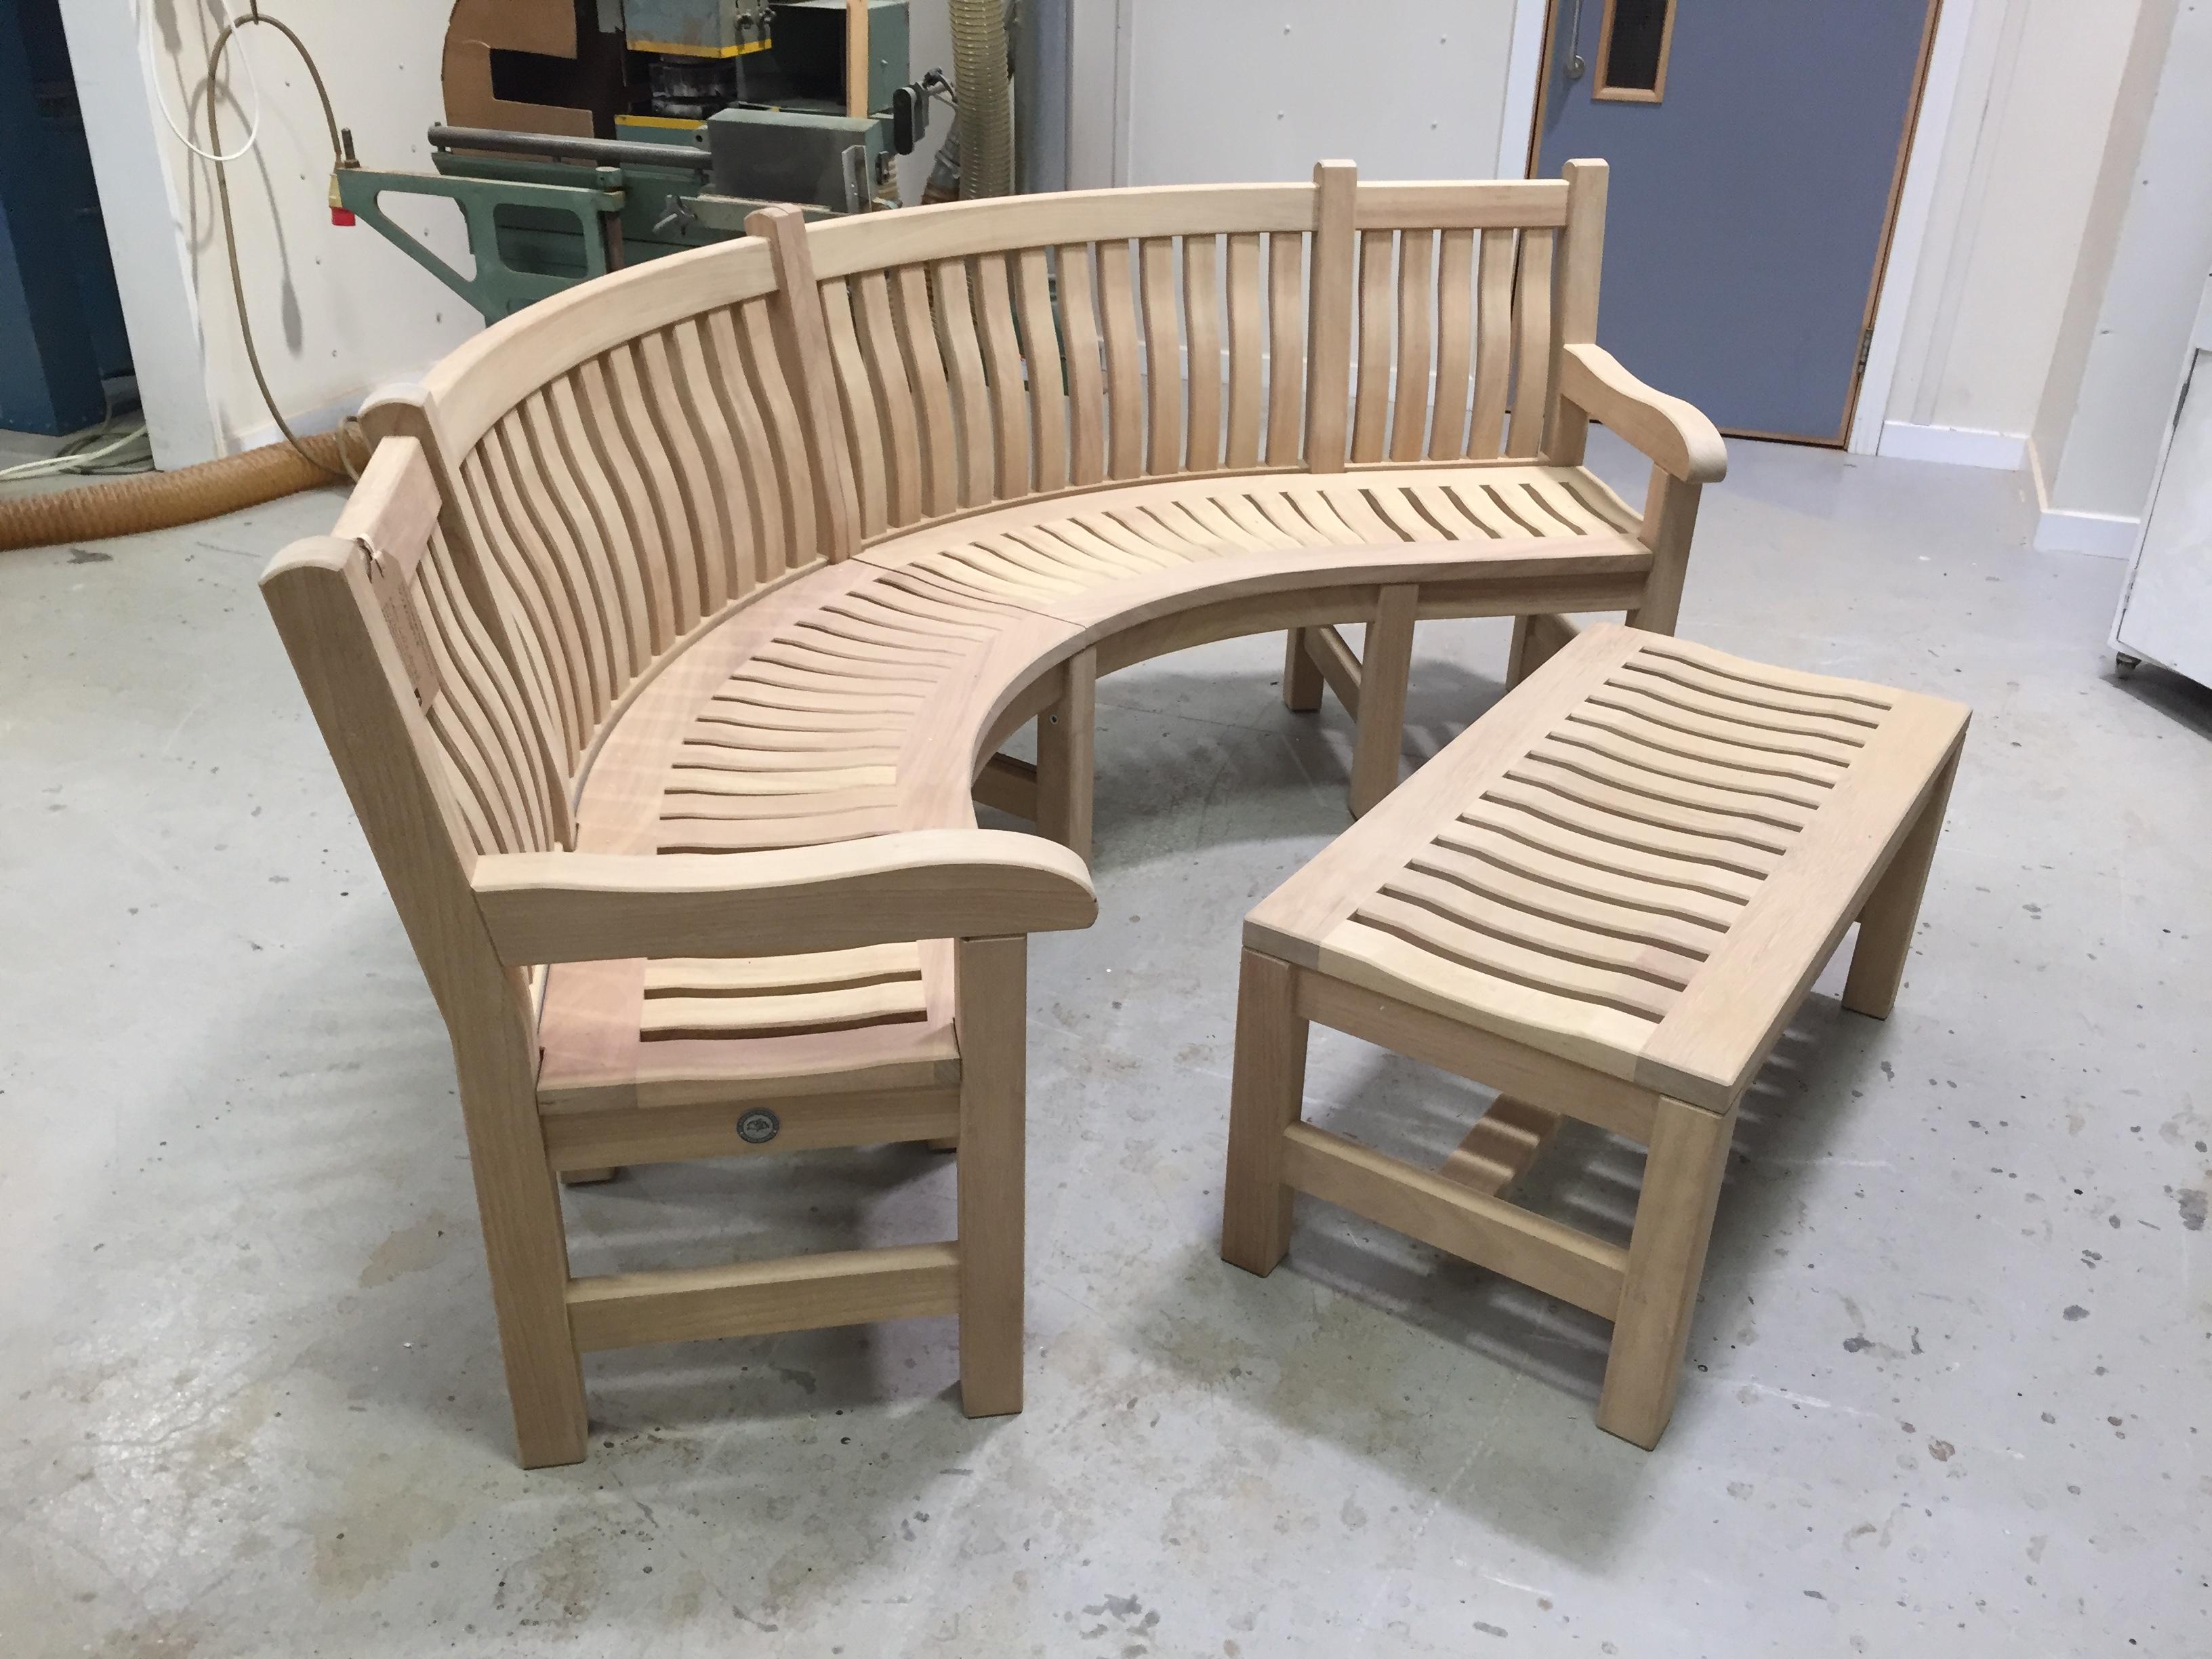 Curved garden bench heading for London private customer | Woodcraft UK